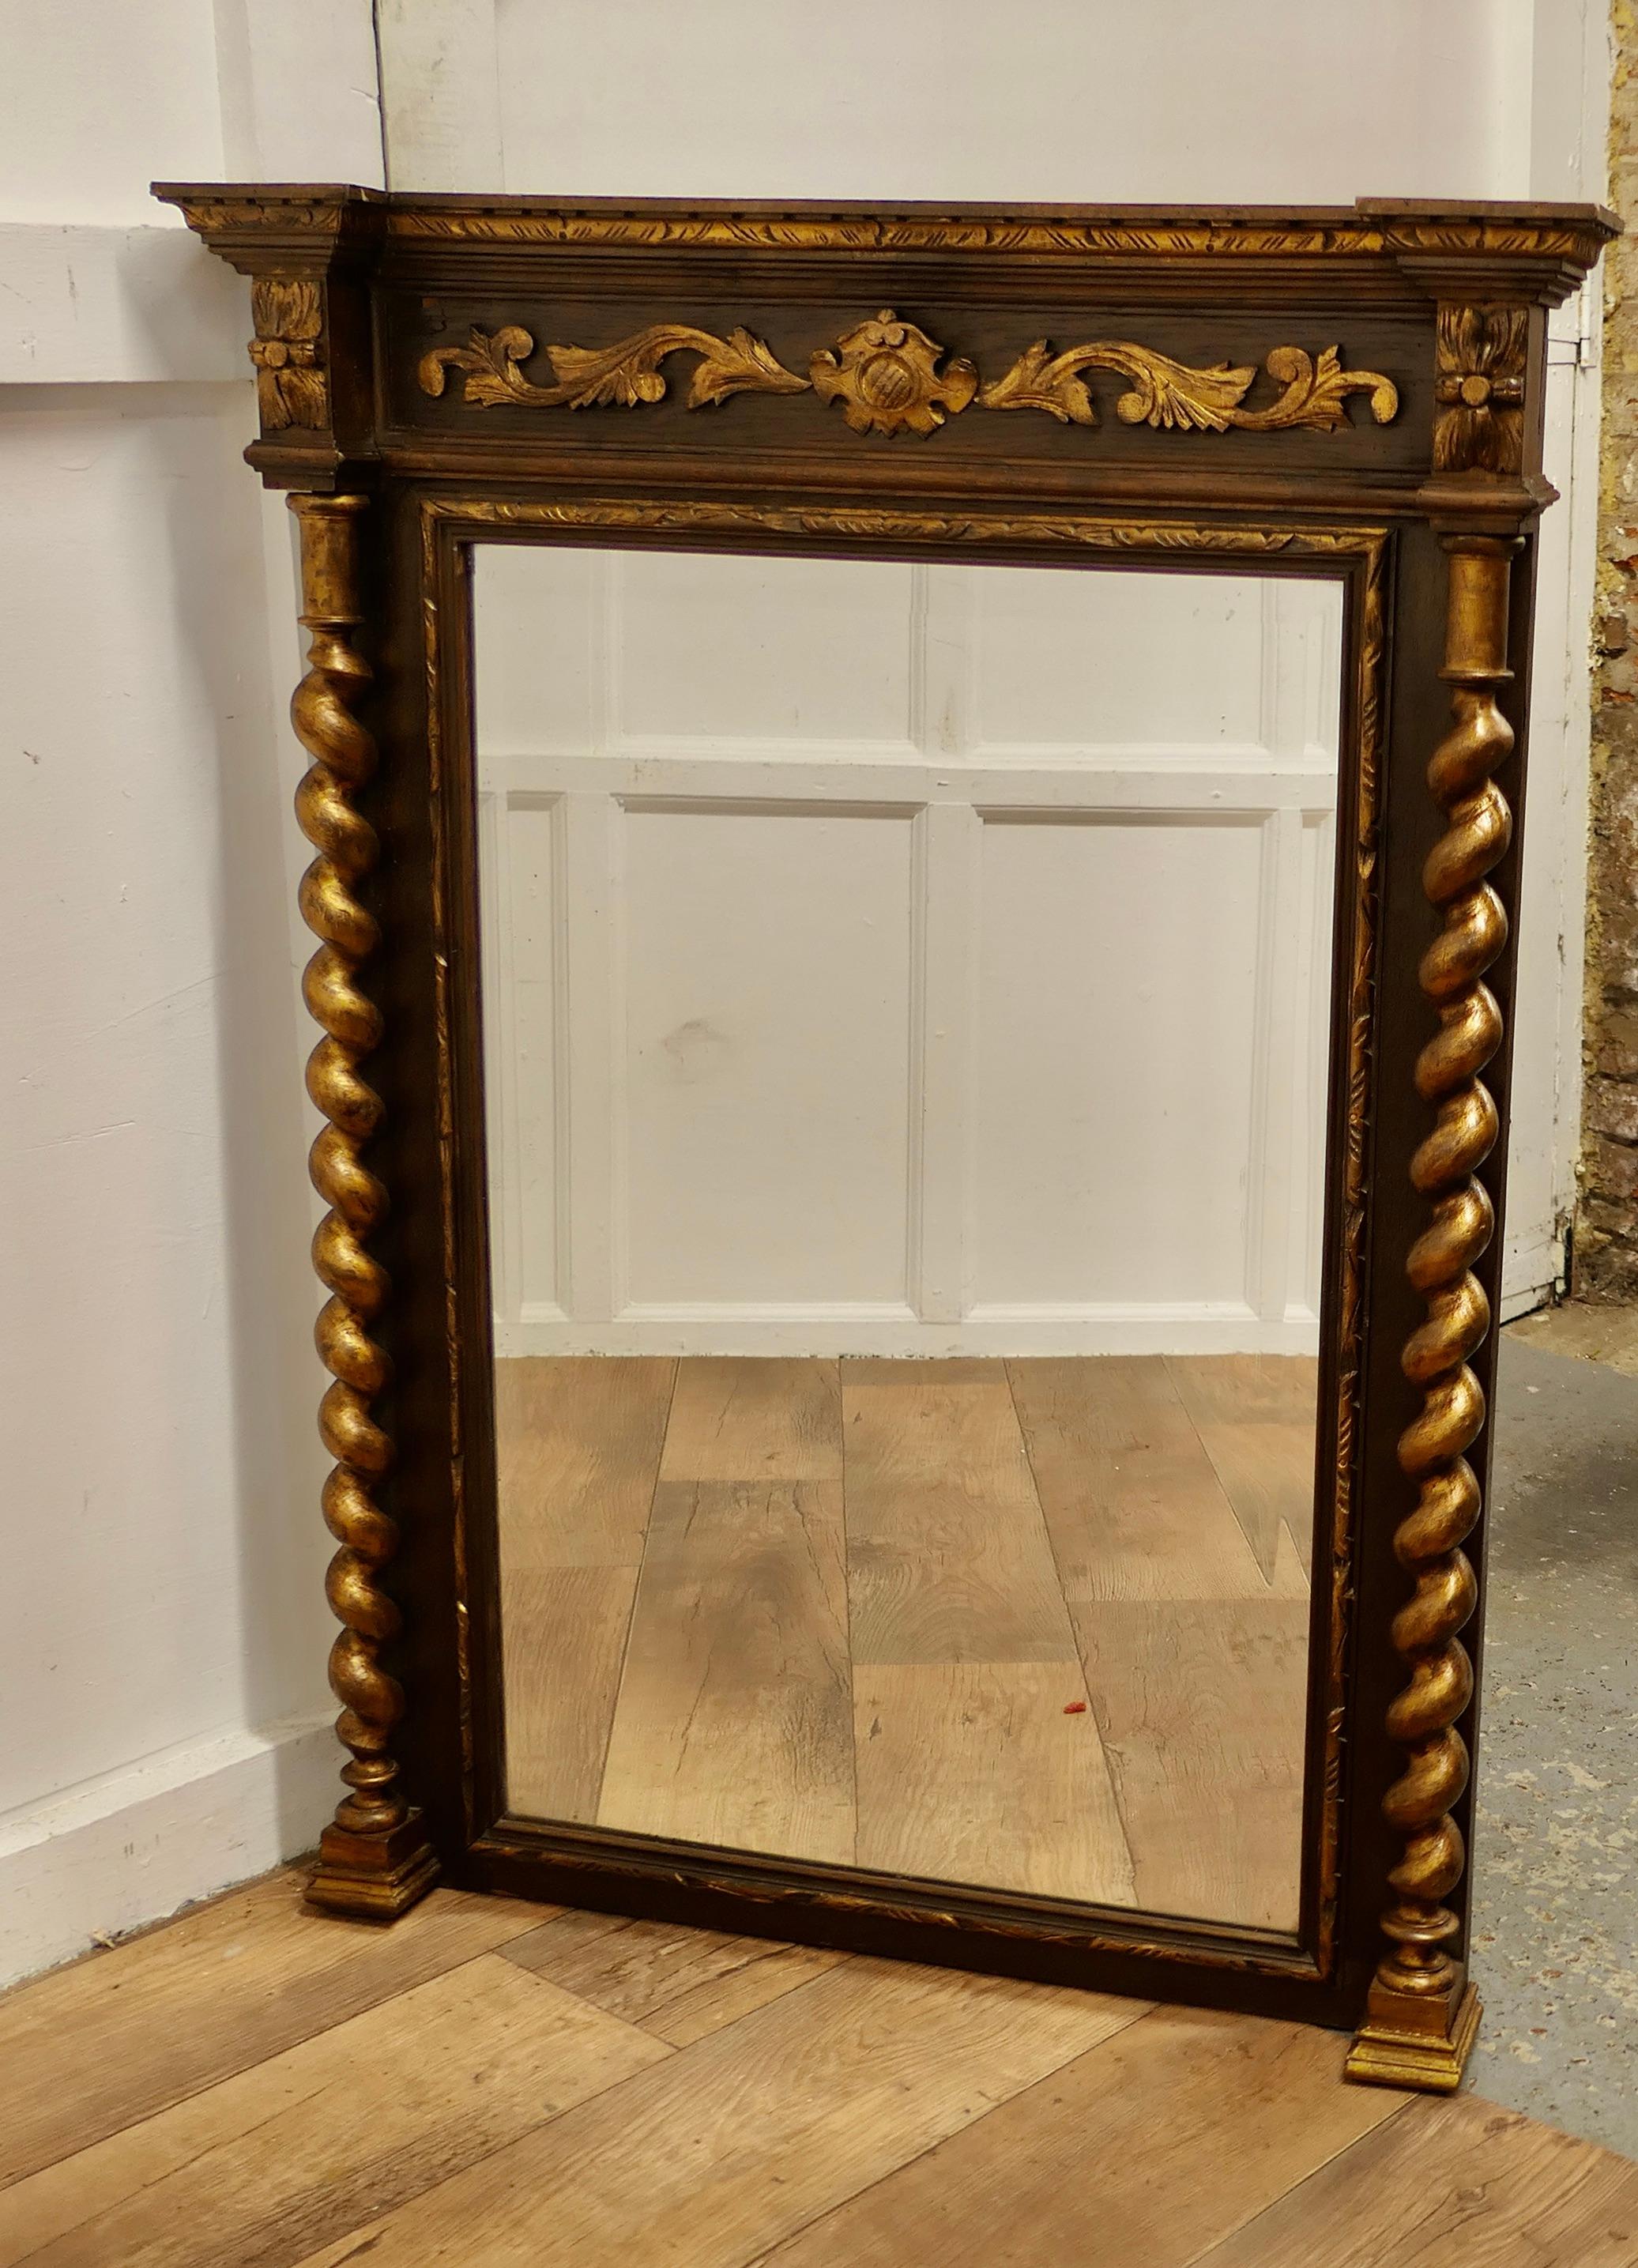 Large French Barley Twist Oak Wall Mirror

The Oak Mirror Frame is attractively carved along the top edge with acanthus leaves and attractive mouldings, it has a large Cornice and barley twist columns at each side, the carved decoration is